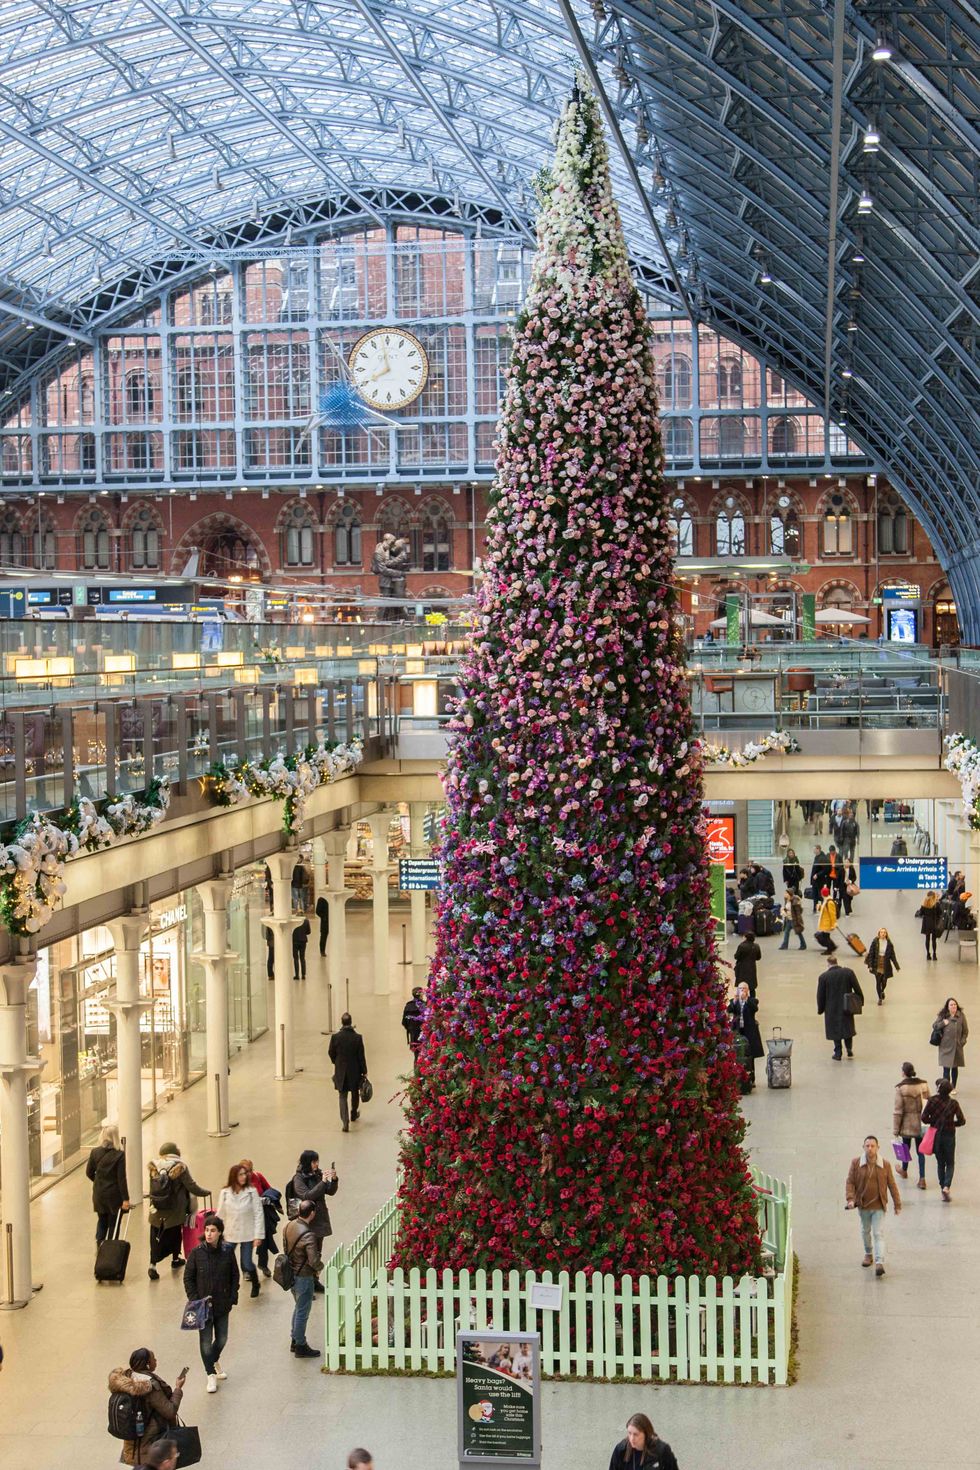 47ft floral Christmas tree unveiled at St Pancras International station, London.